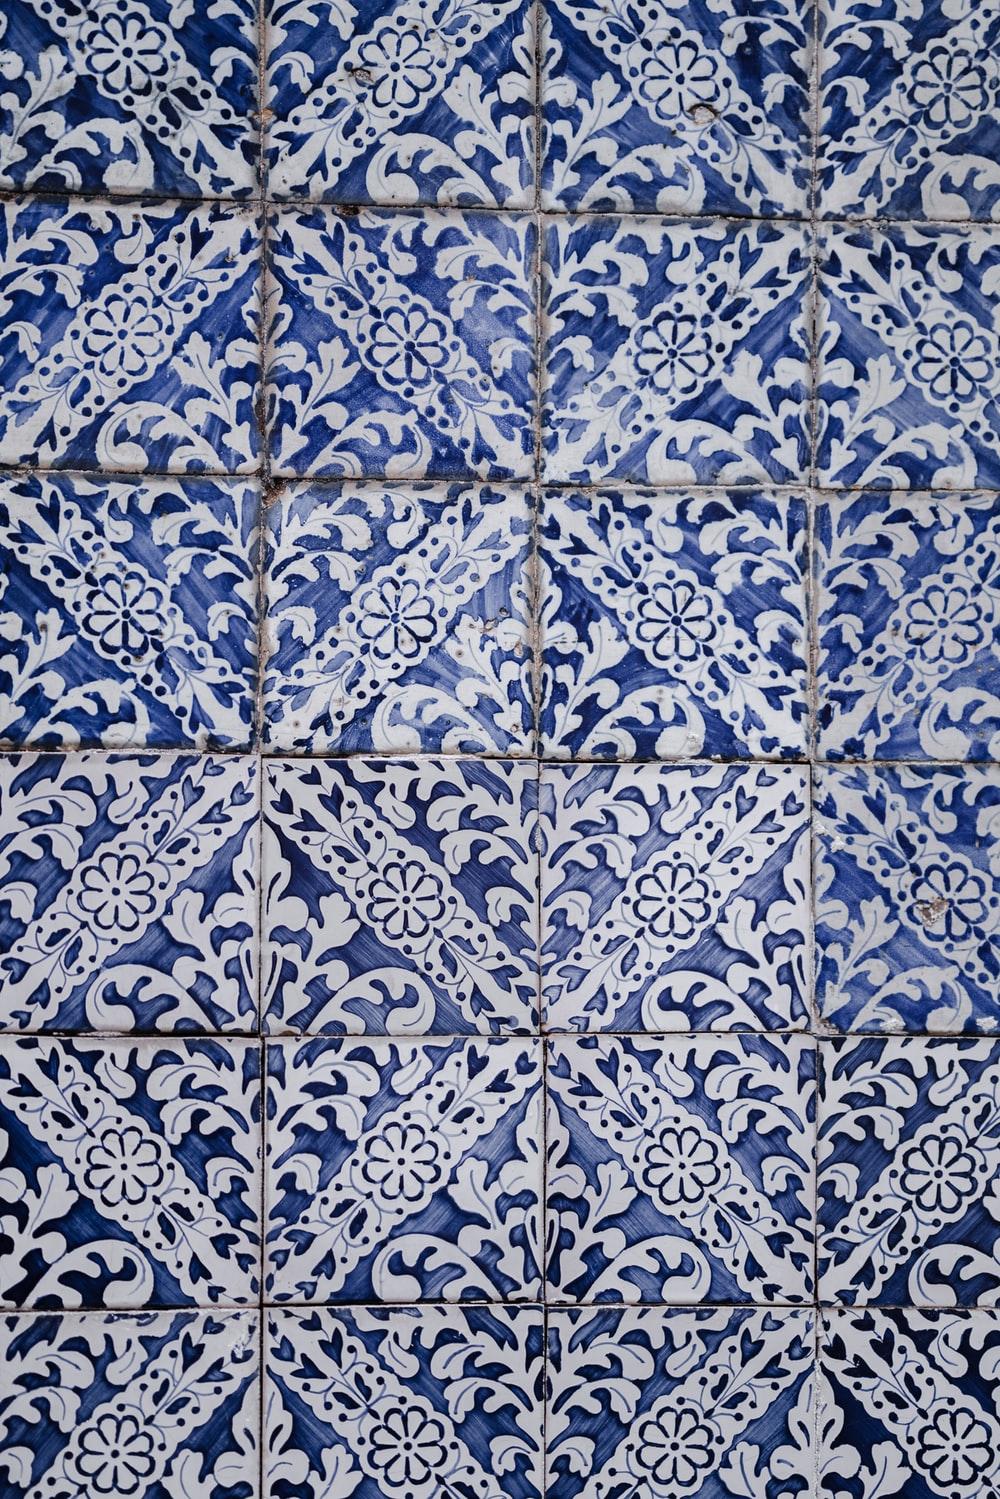 Tile Picture [HQ]. Download Free Image